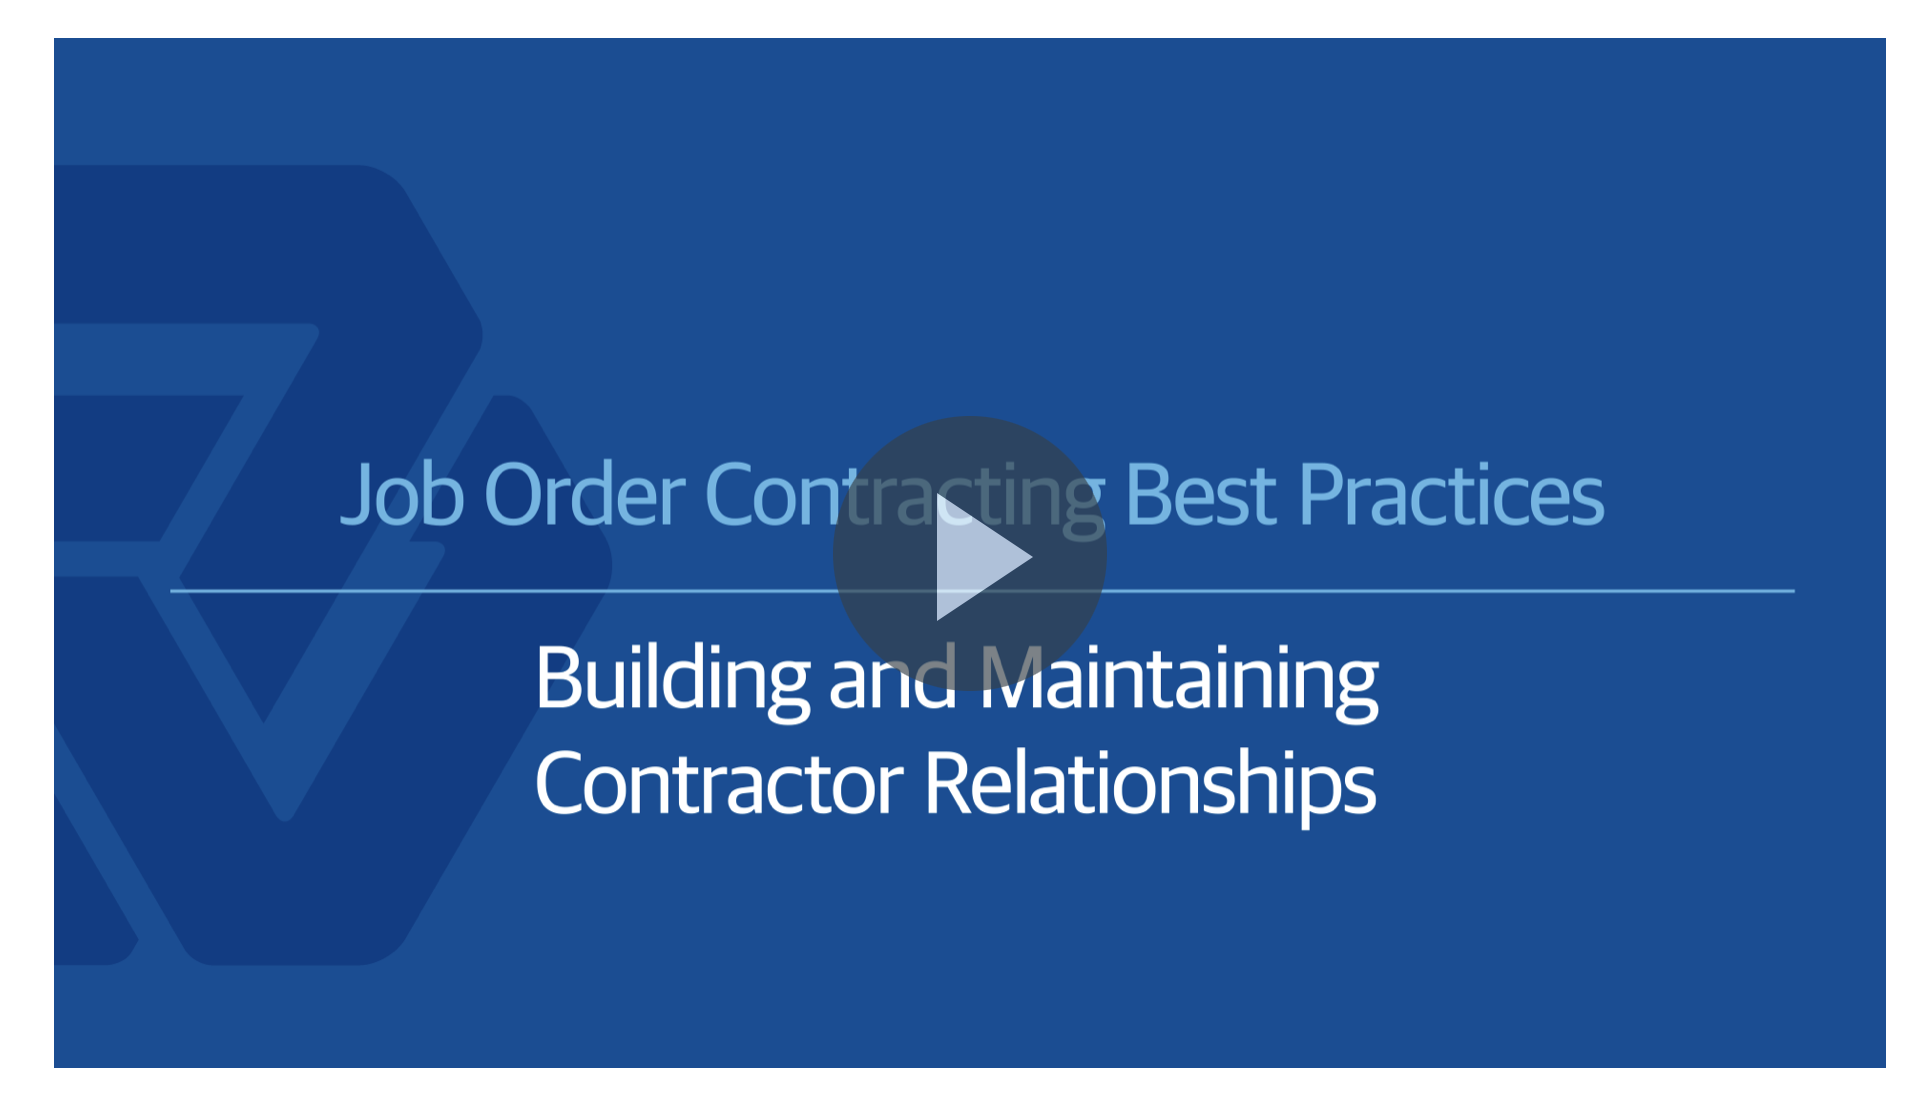 The importance of contractor relationships to the success of a JOC program.